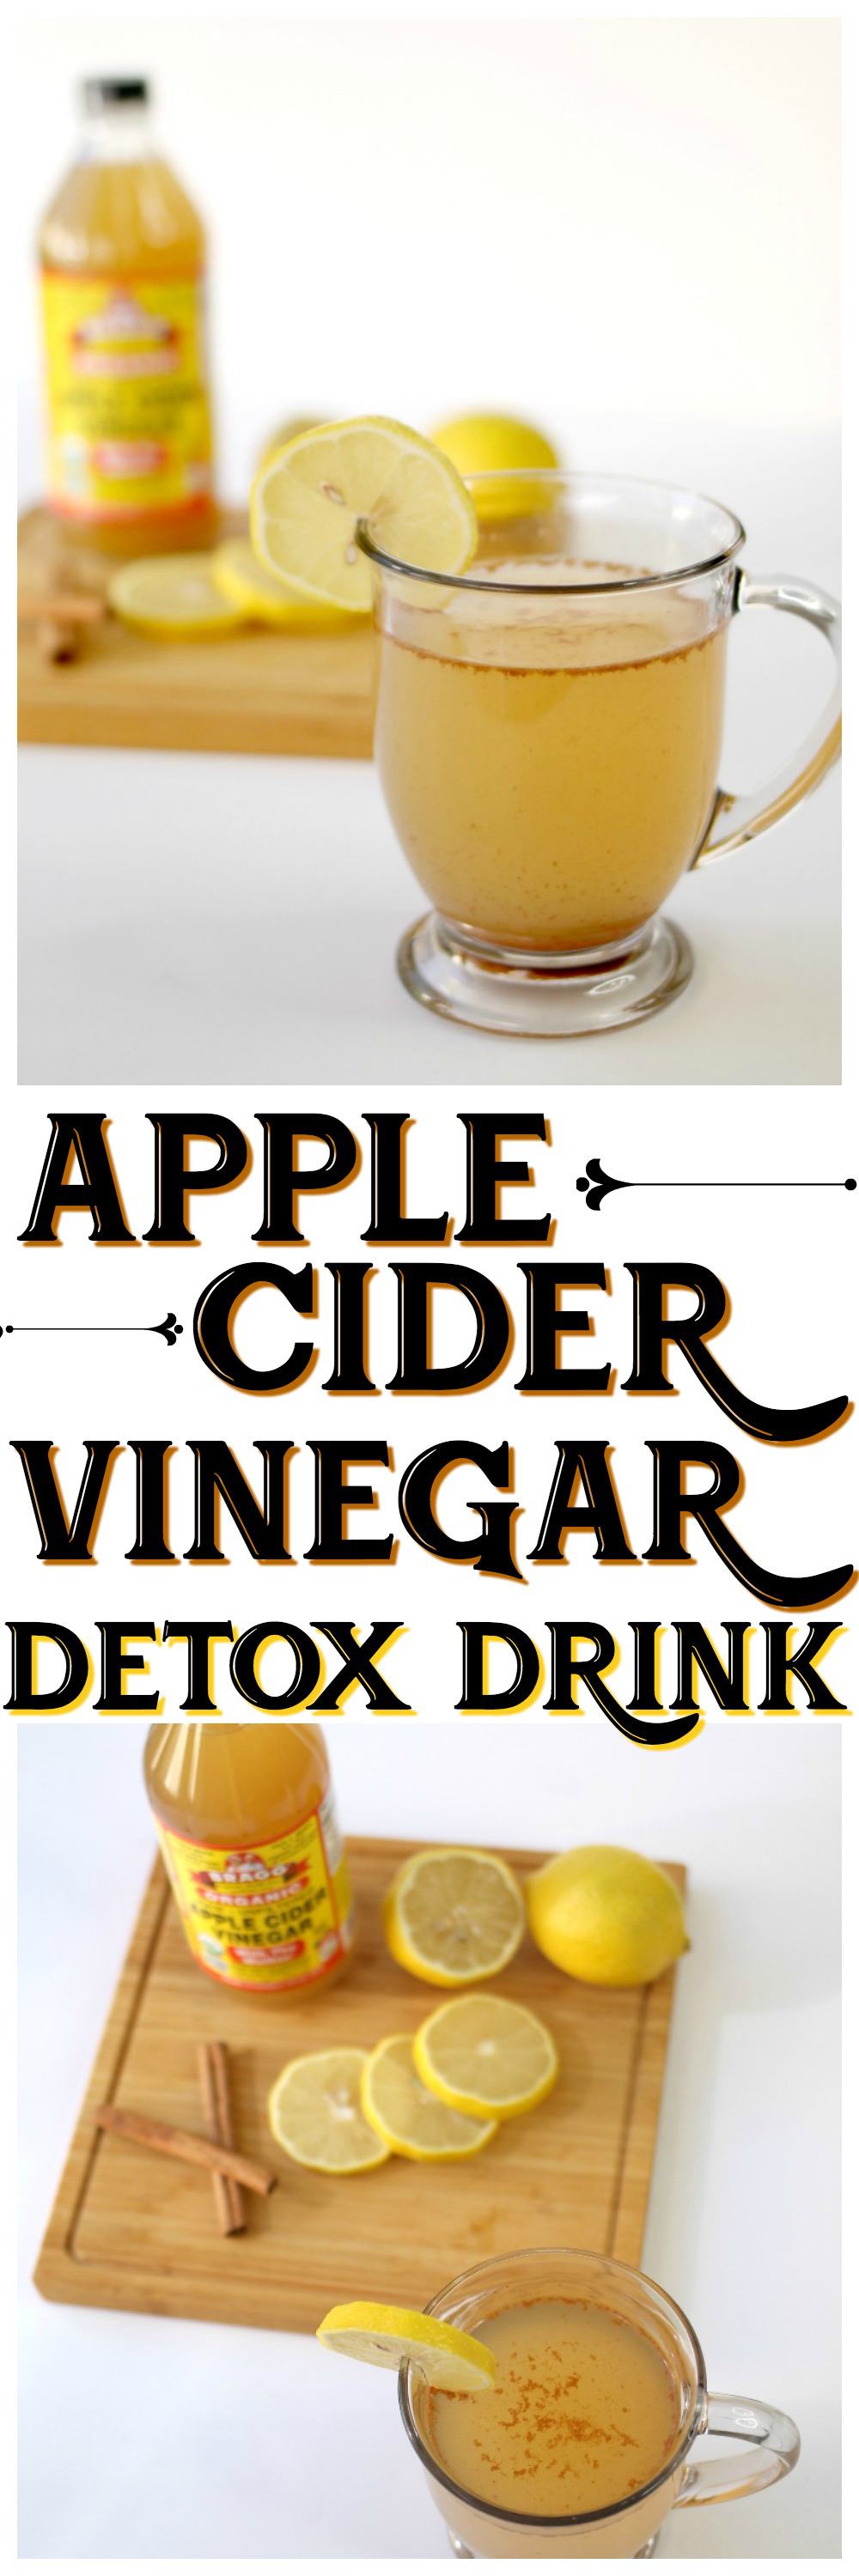 Try this delicious Apple Cider Vinegar Detox Drink to look and feel your best! #keto #ACV